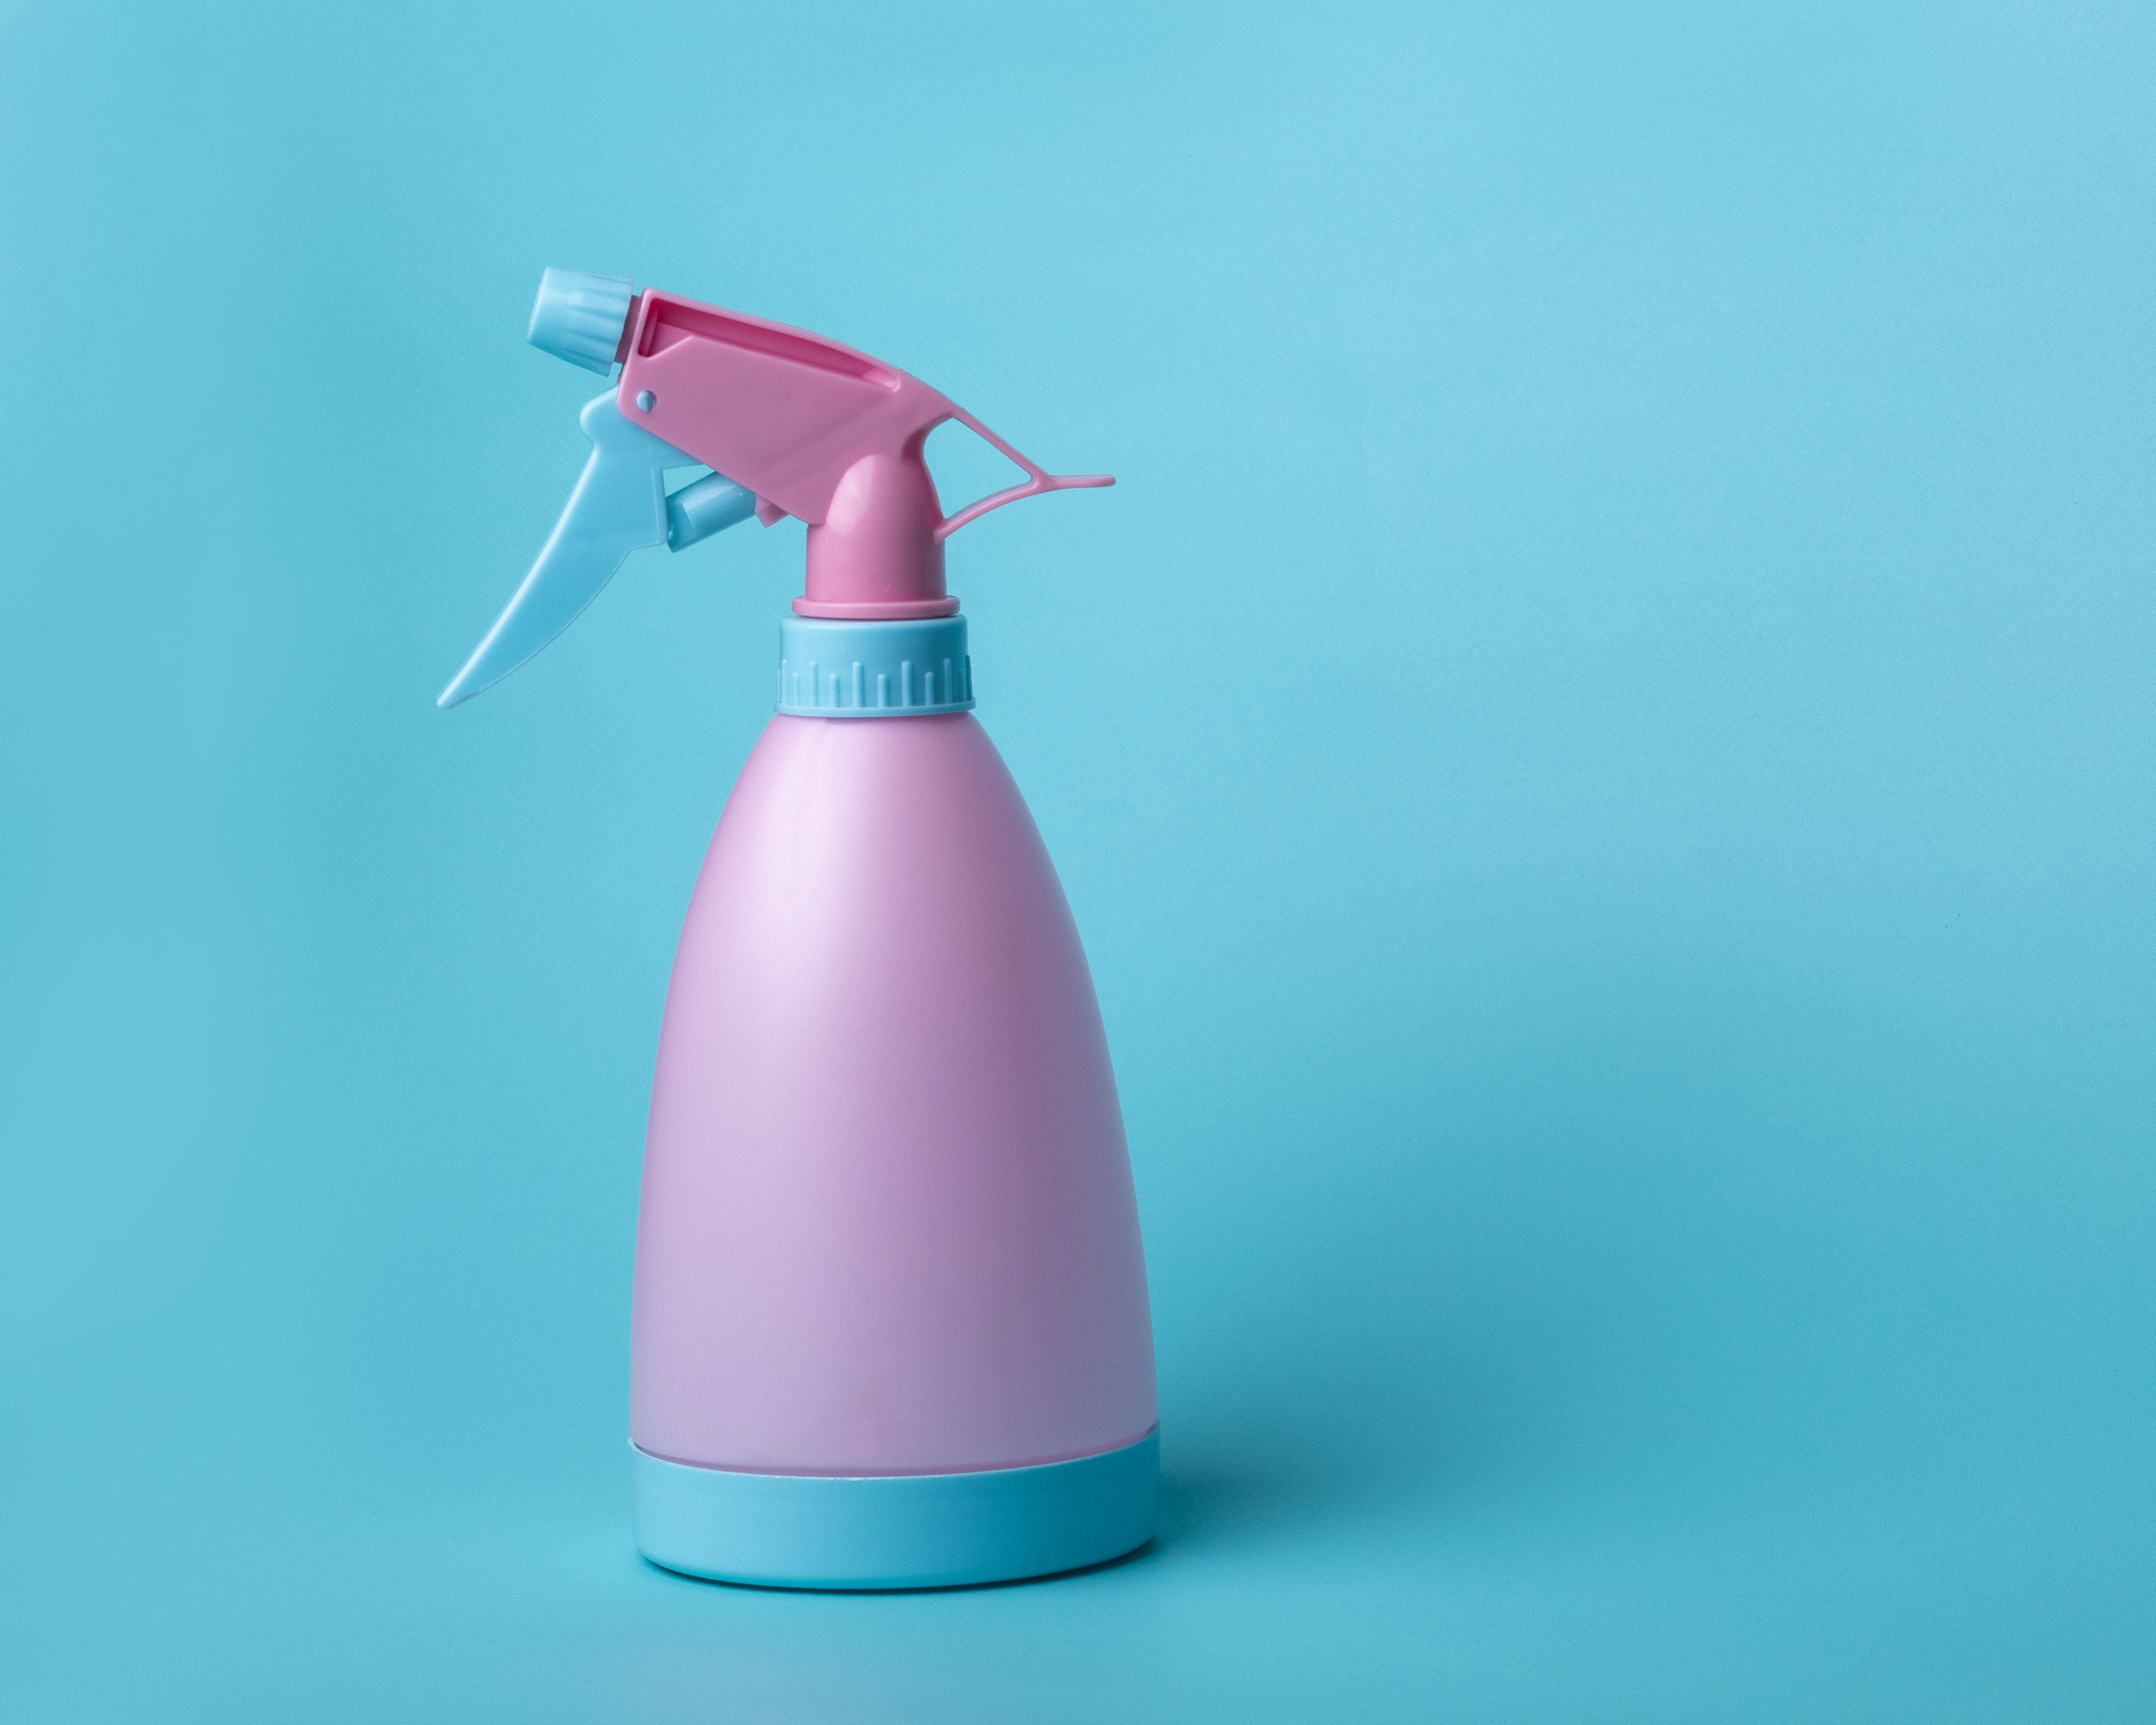 a pink squirt bottle against a light blue background